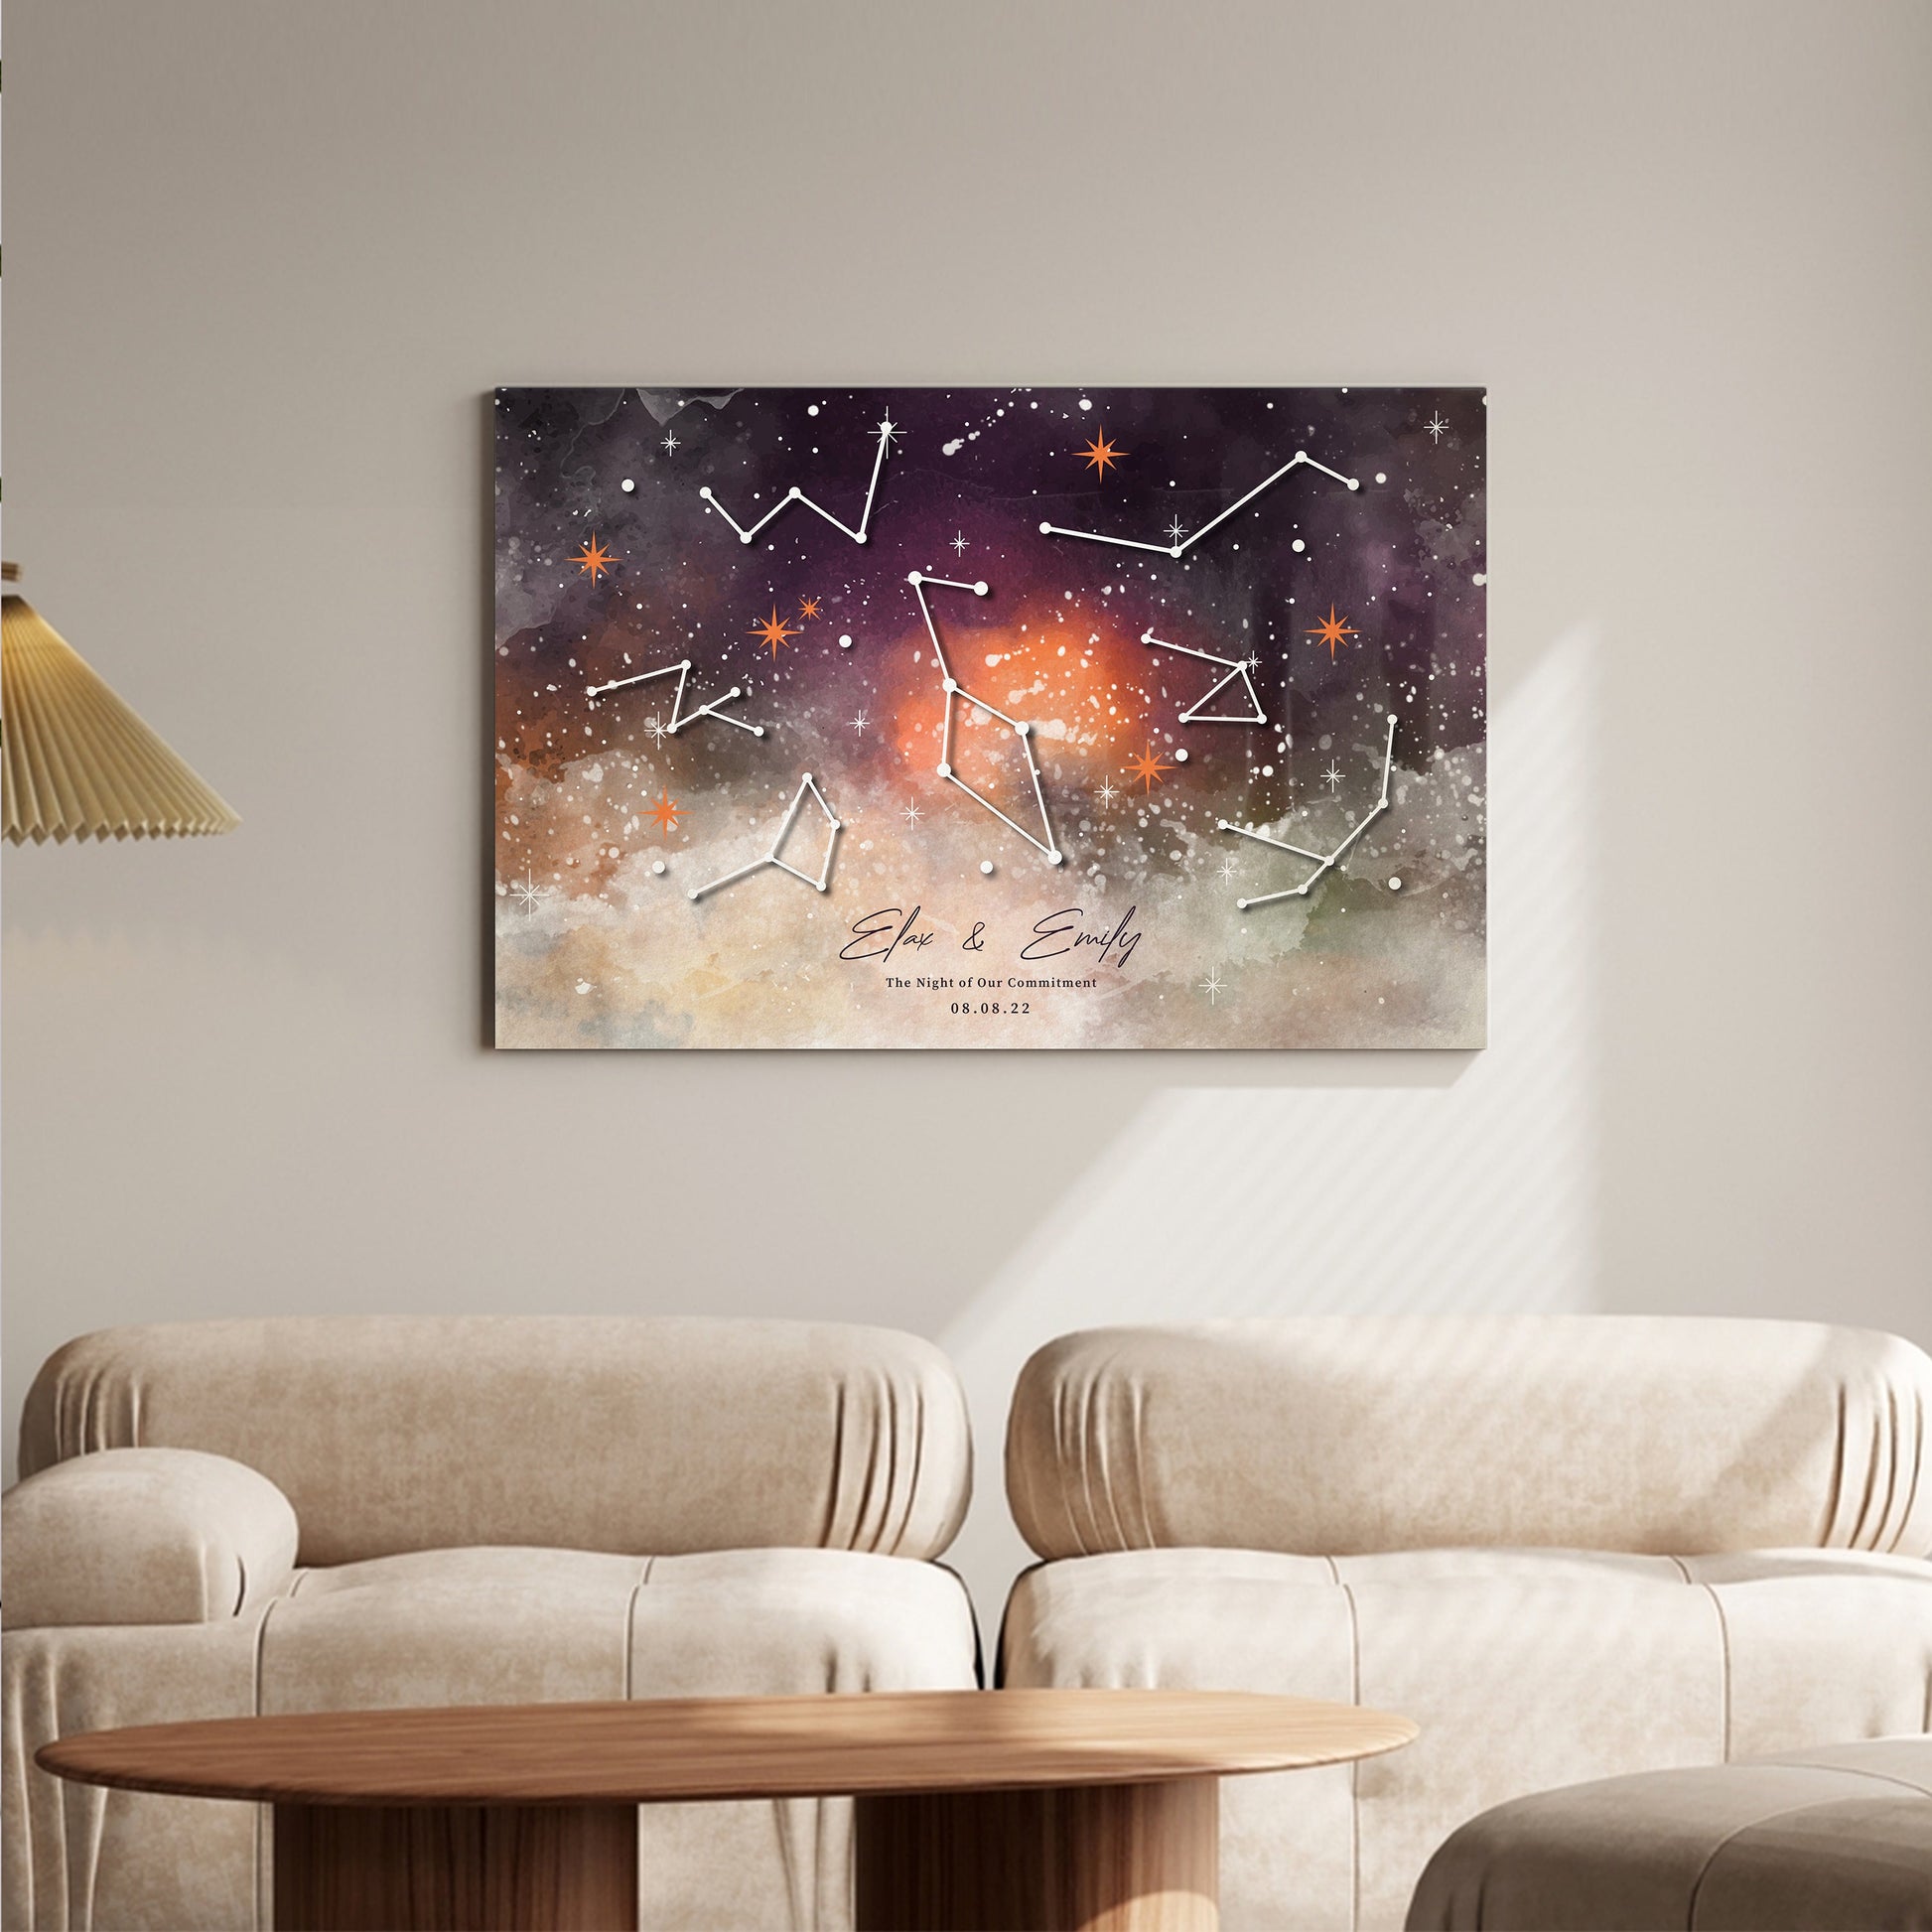 Personalized star map on wall, a heartfelt gift in view.